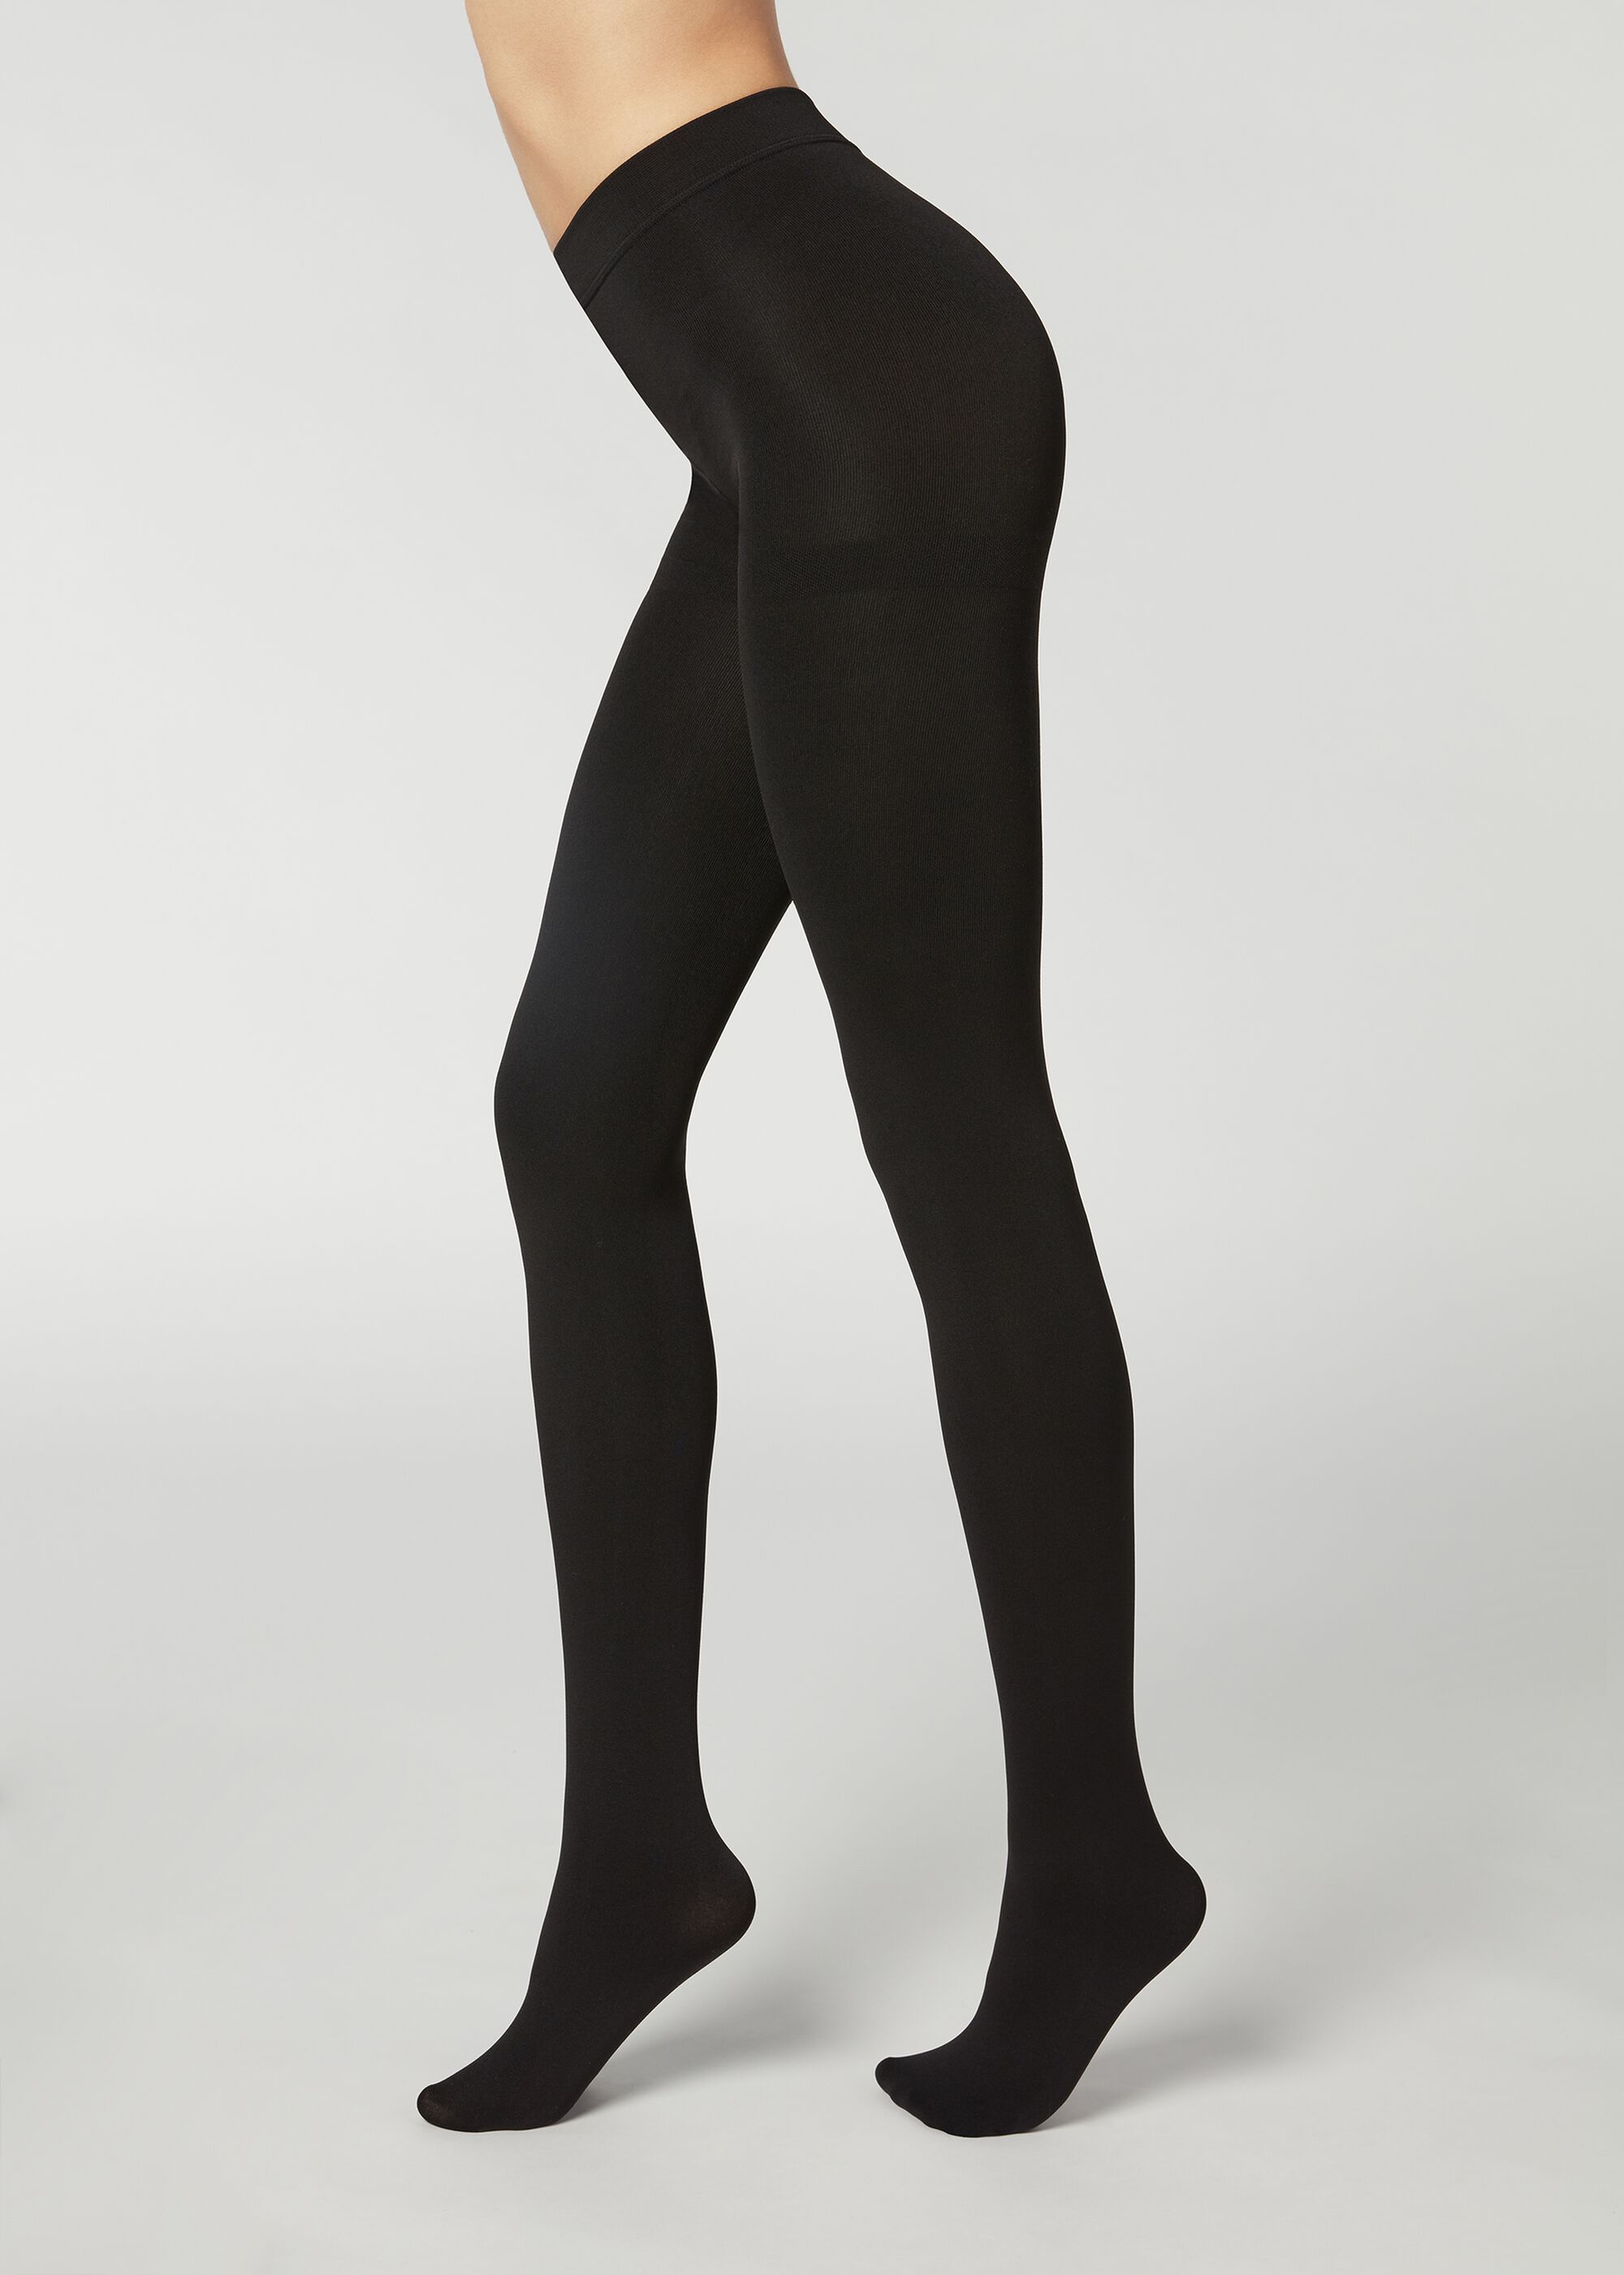 Thermal Super Opaque Tights - Opaque tights - Calzedonia | Calzedonia US